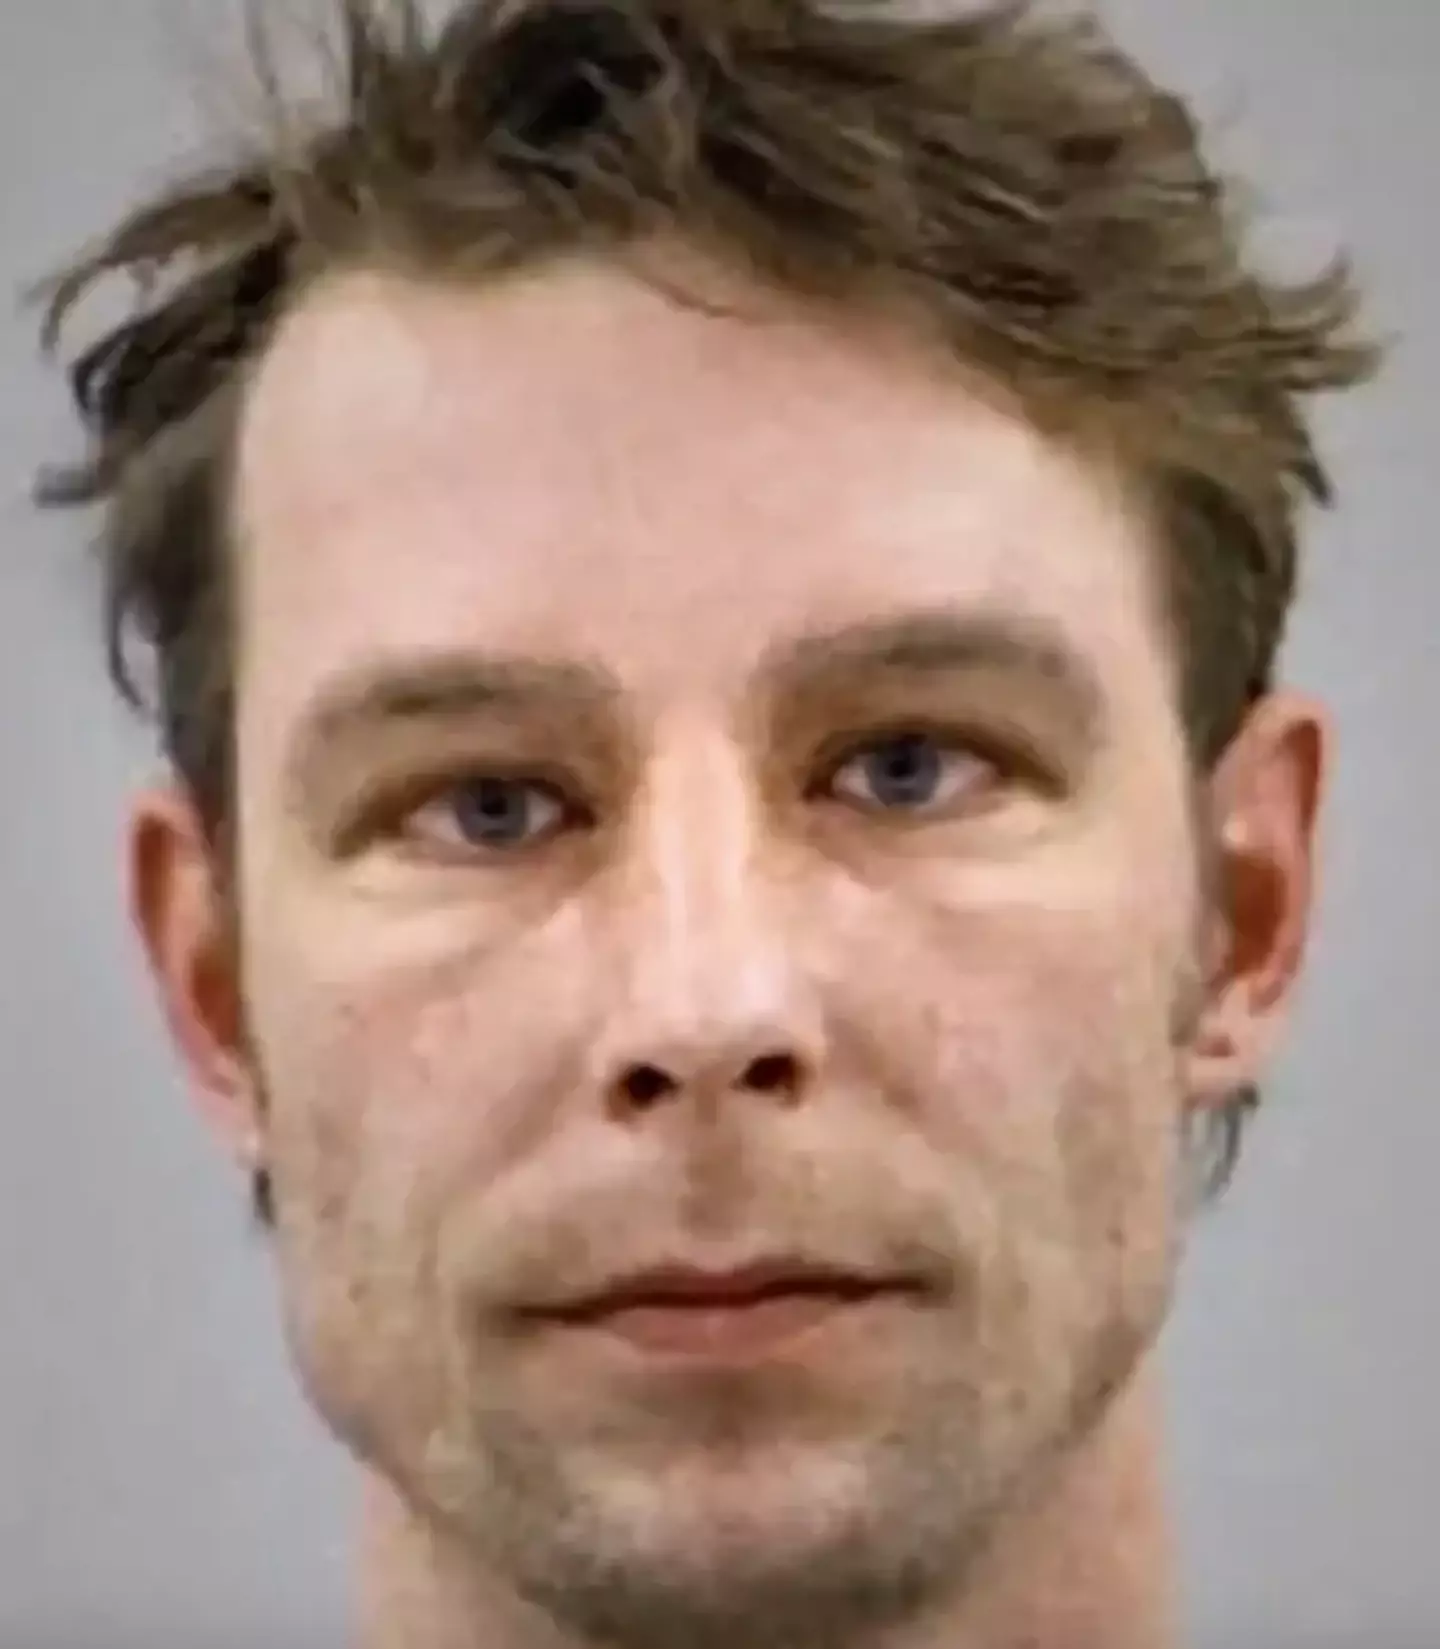 Christian Brueckner was named an official suspect in the McCann case earlier this year.